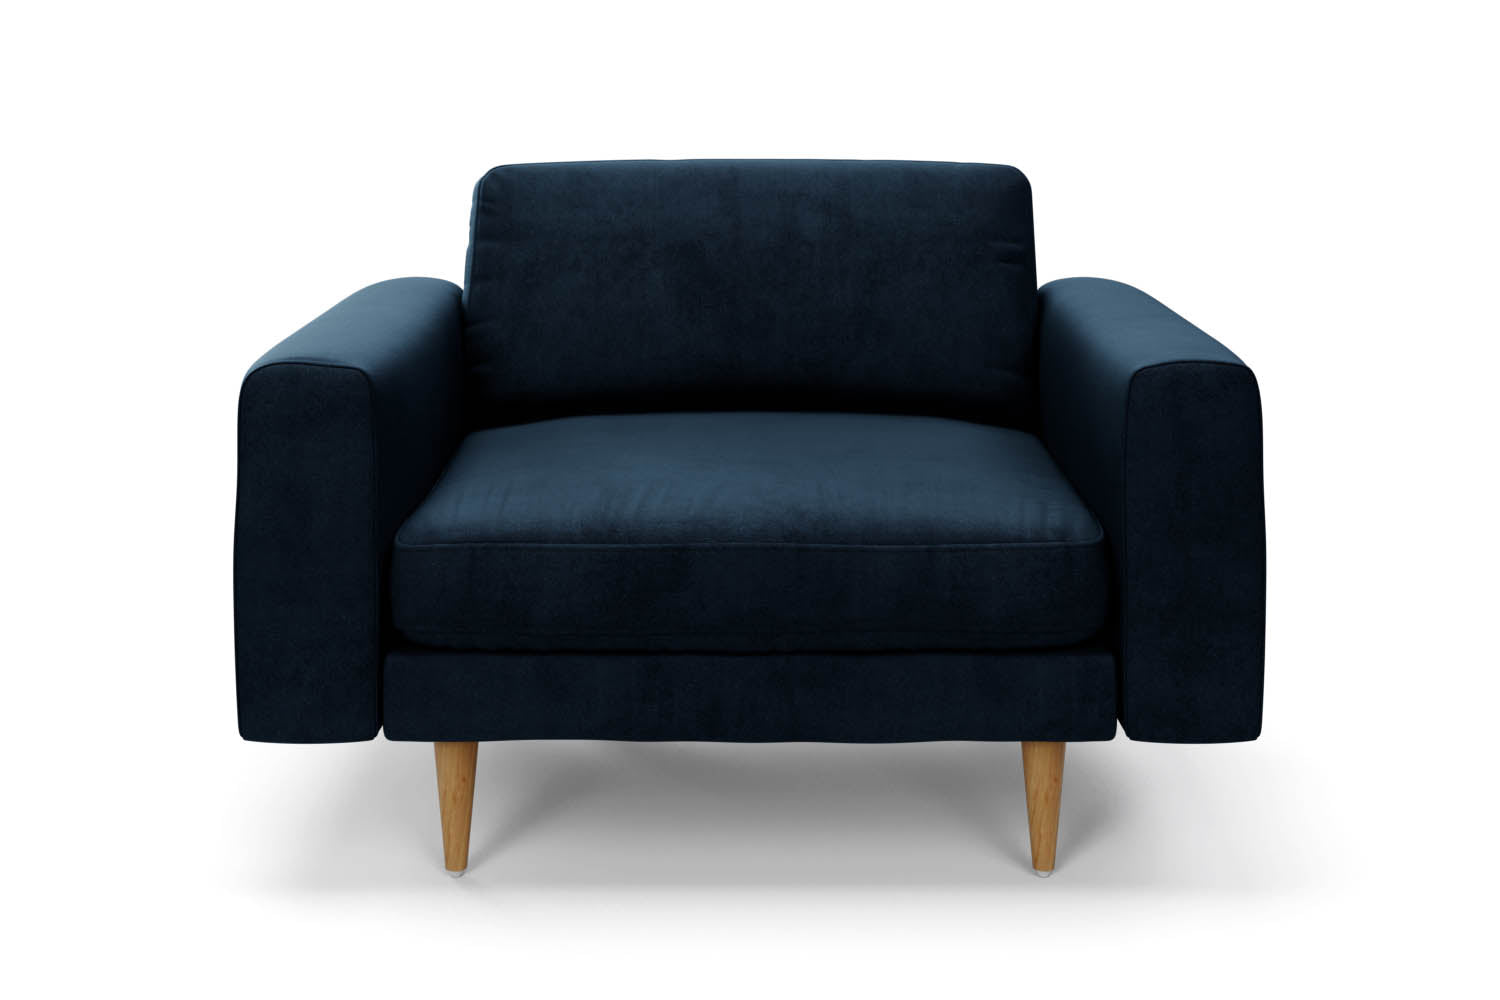 SNUG | The Big Chill 1.5 Seater Snuggler in Deep Blue variant_40837172428848